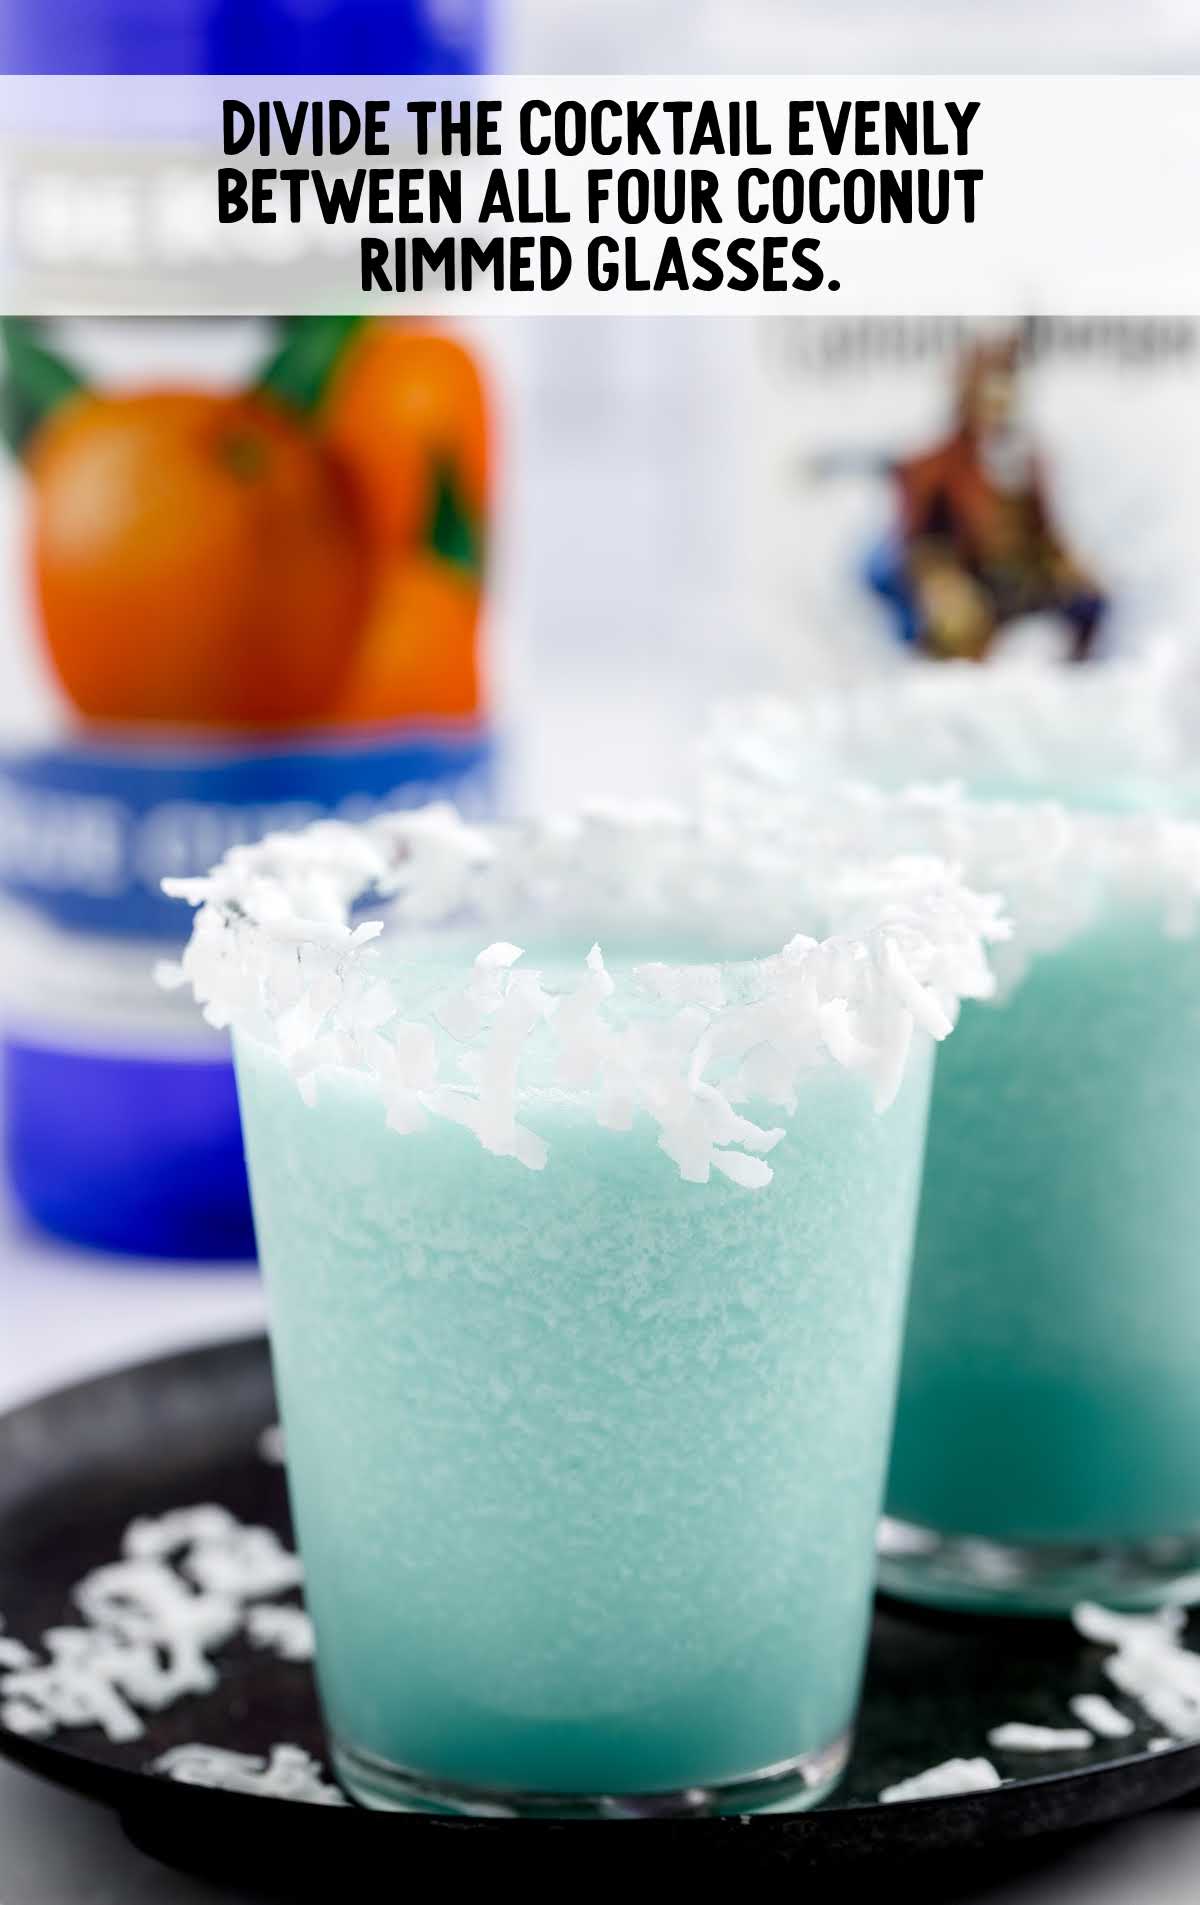 Jack Frost Cocktail poured in a glass with a coconut rim